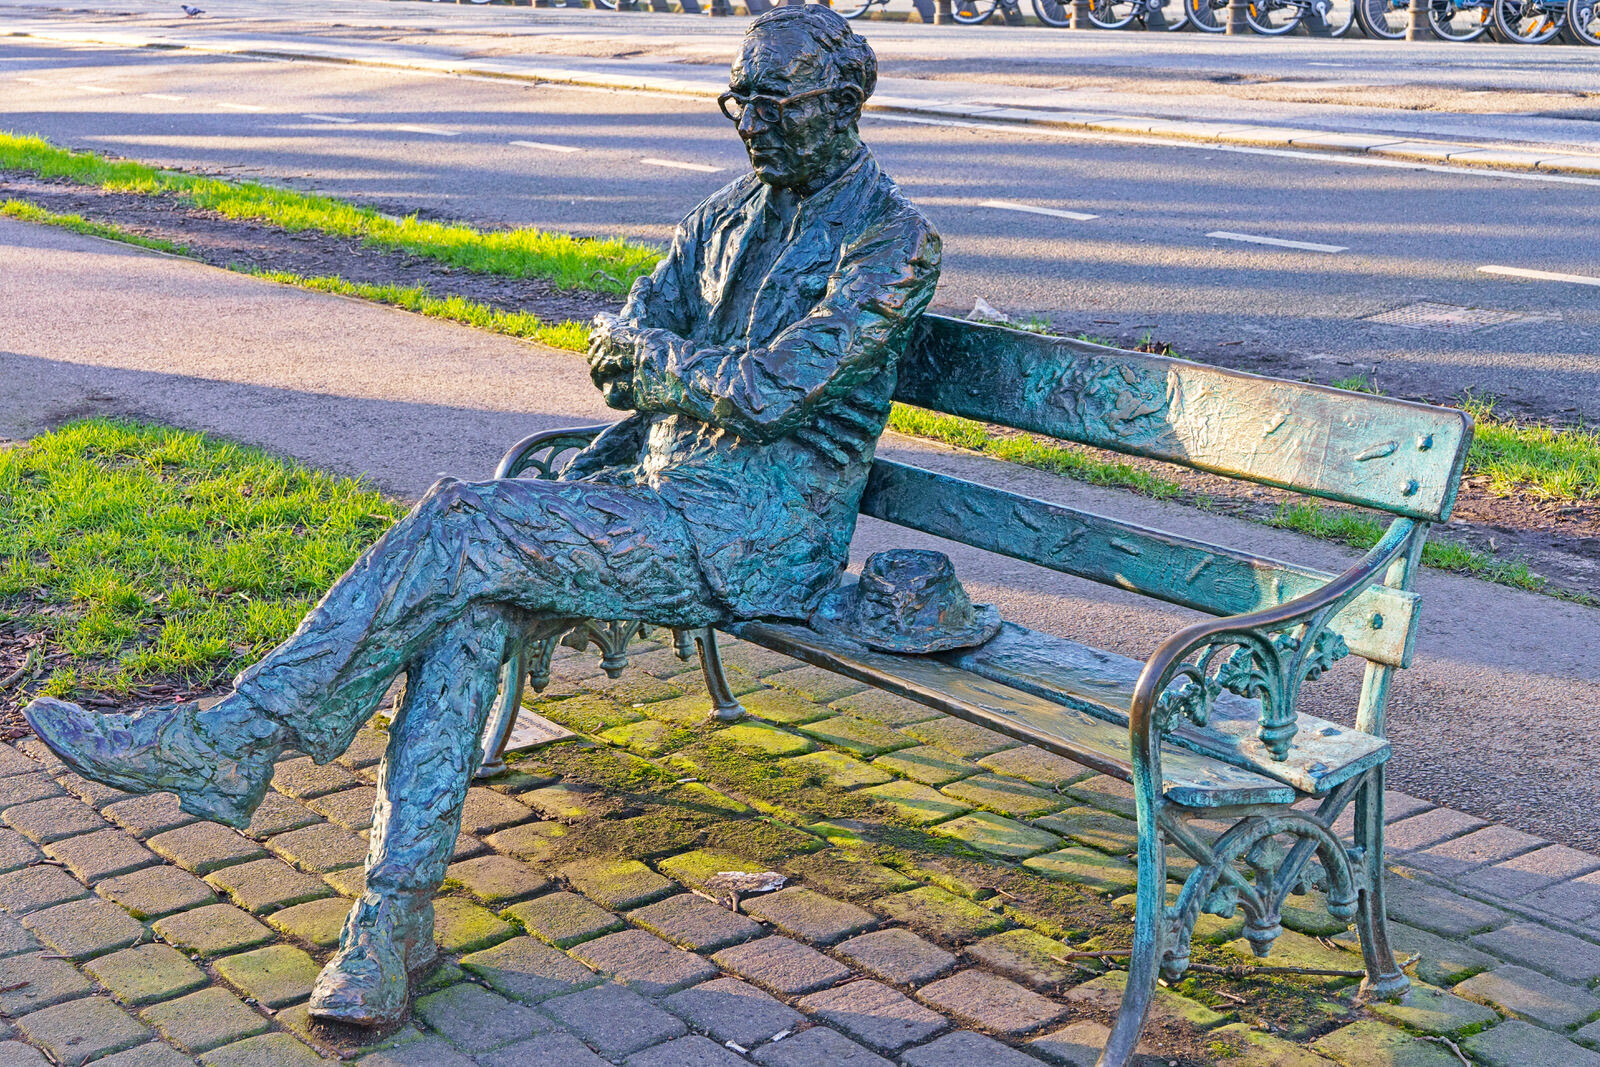 PATRICK KAVANAGH SCULPTURE [PRESENTED TO CITY AND PEOPLE OF DUBLIN BY ZENEZA]-228028-1